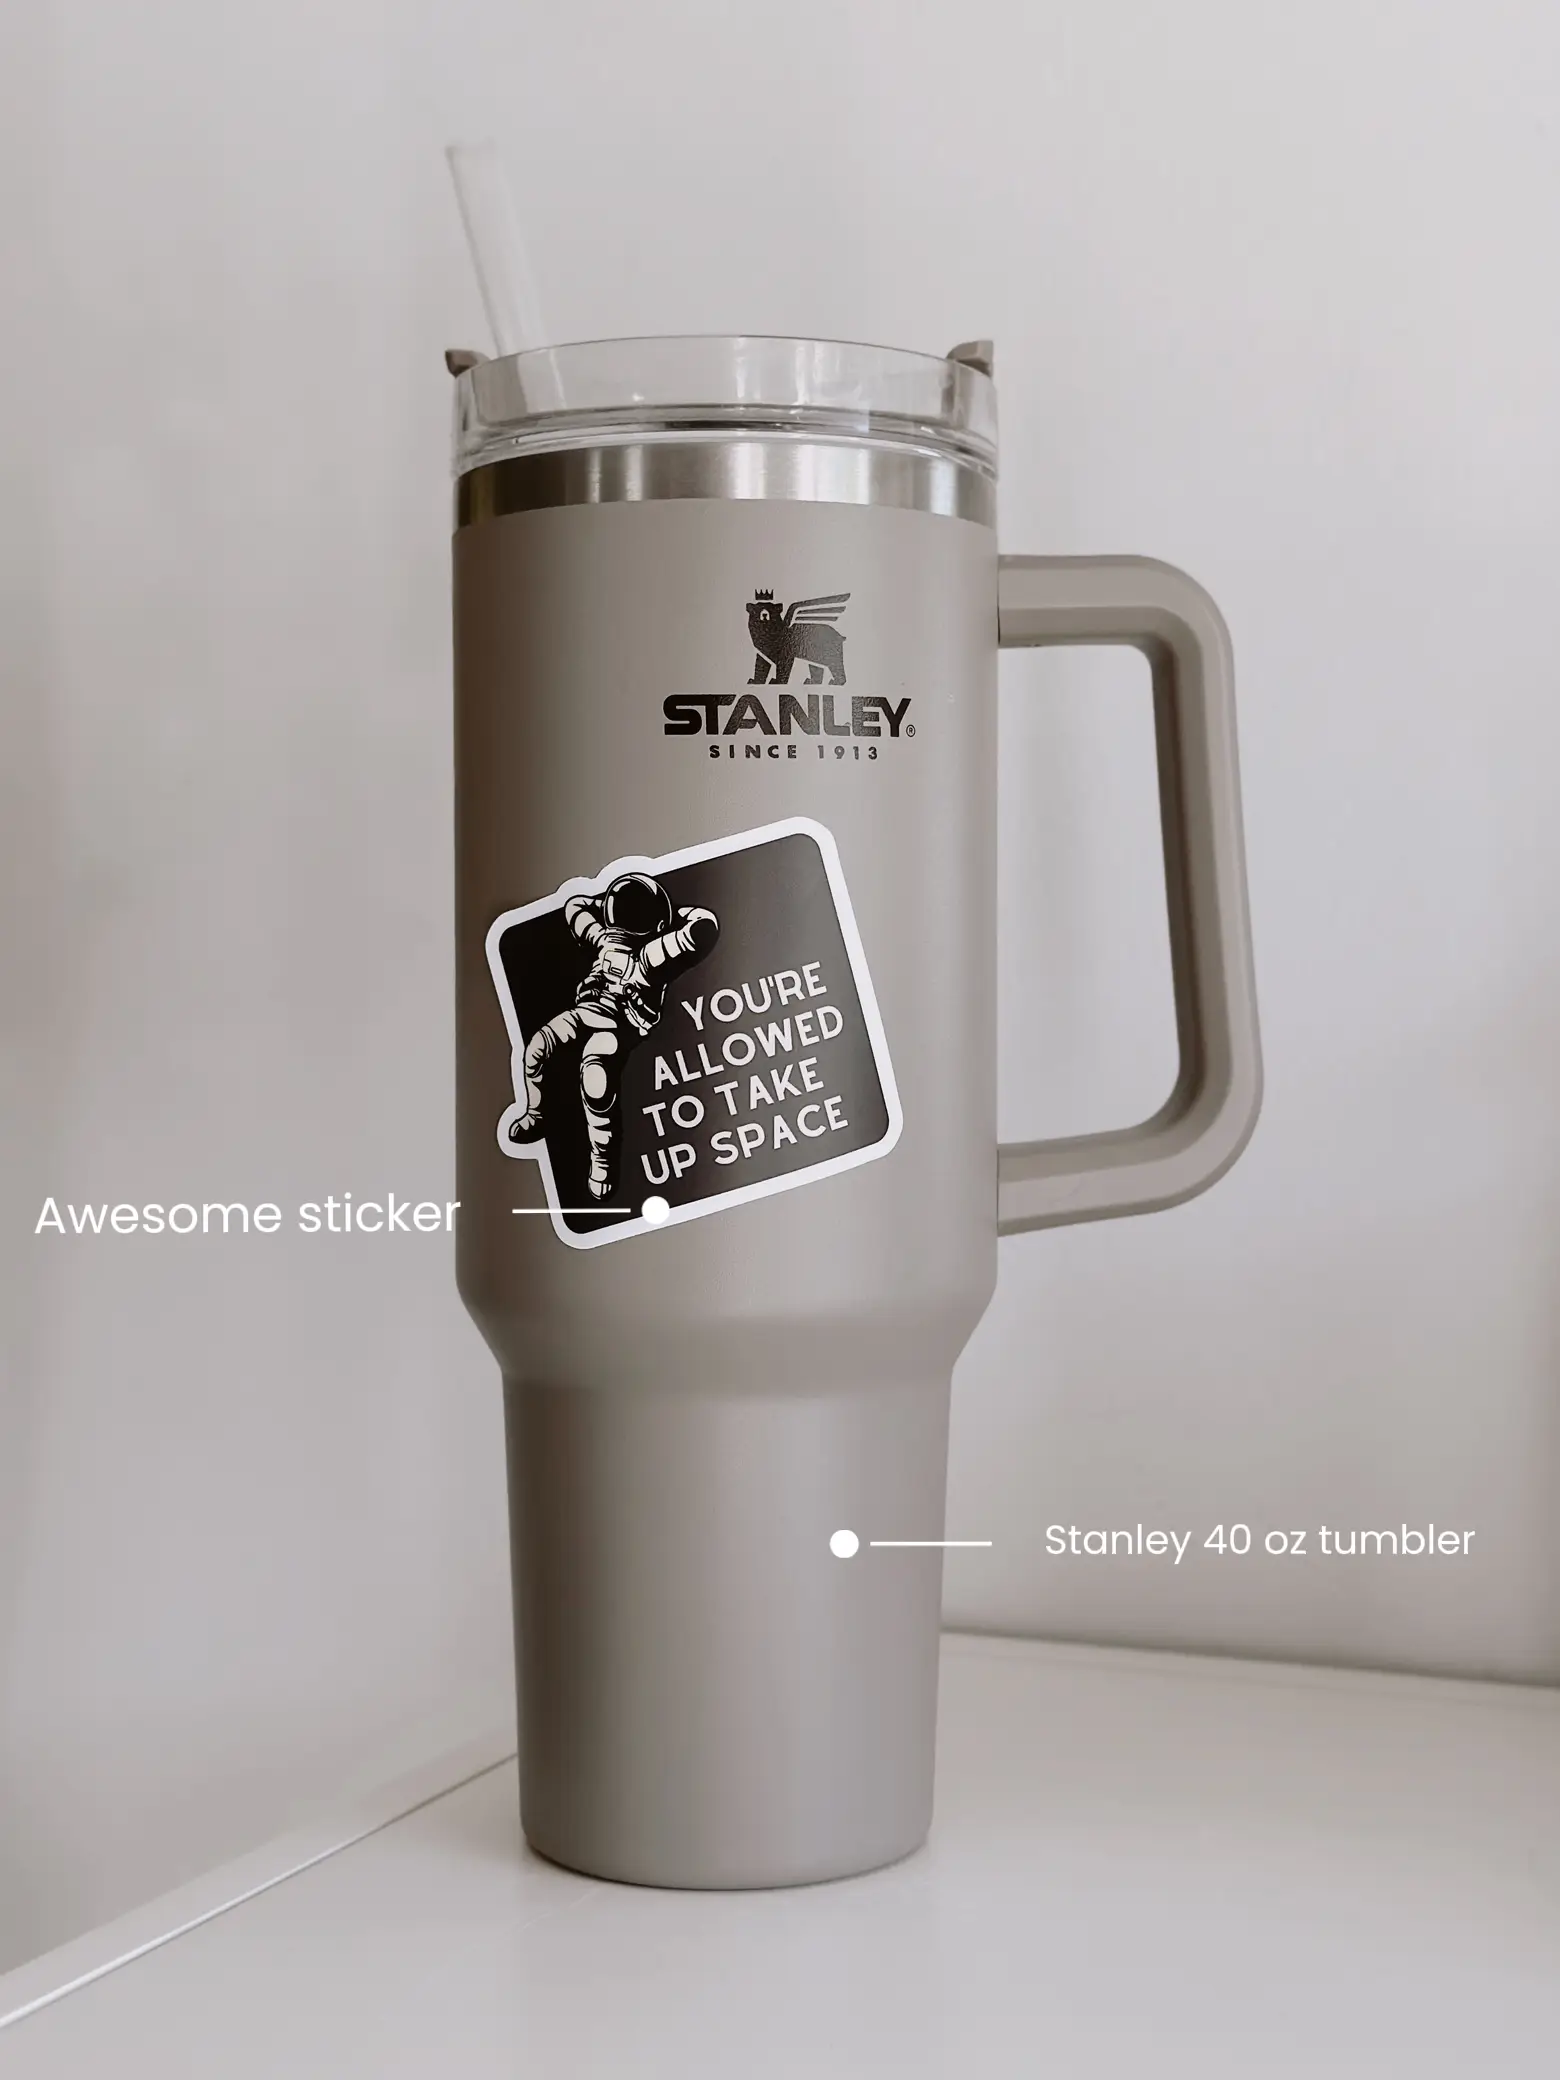 Make Life Easier With These $3 Stanley Tumbler Accessories